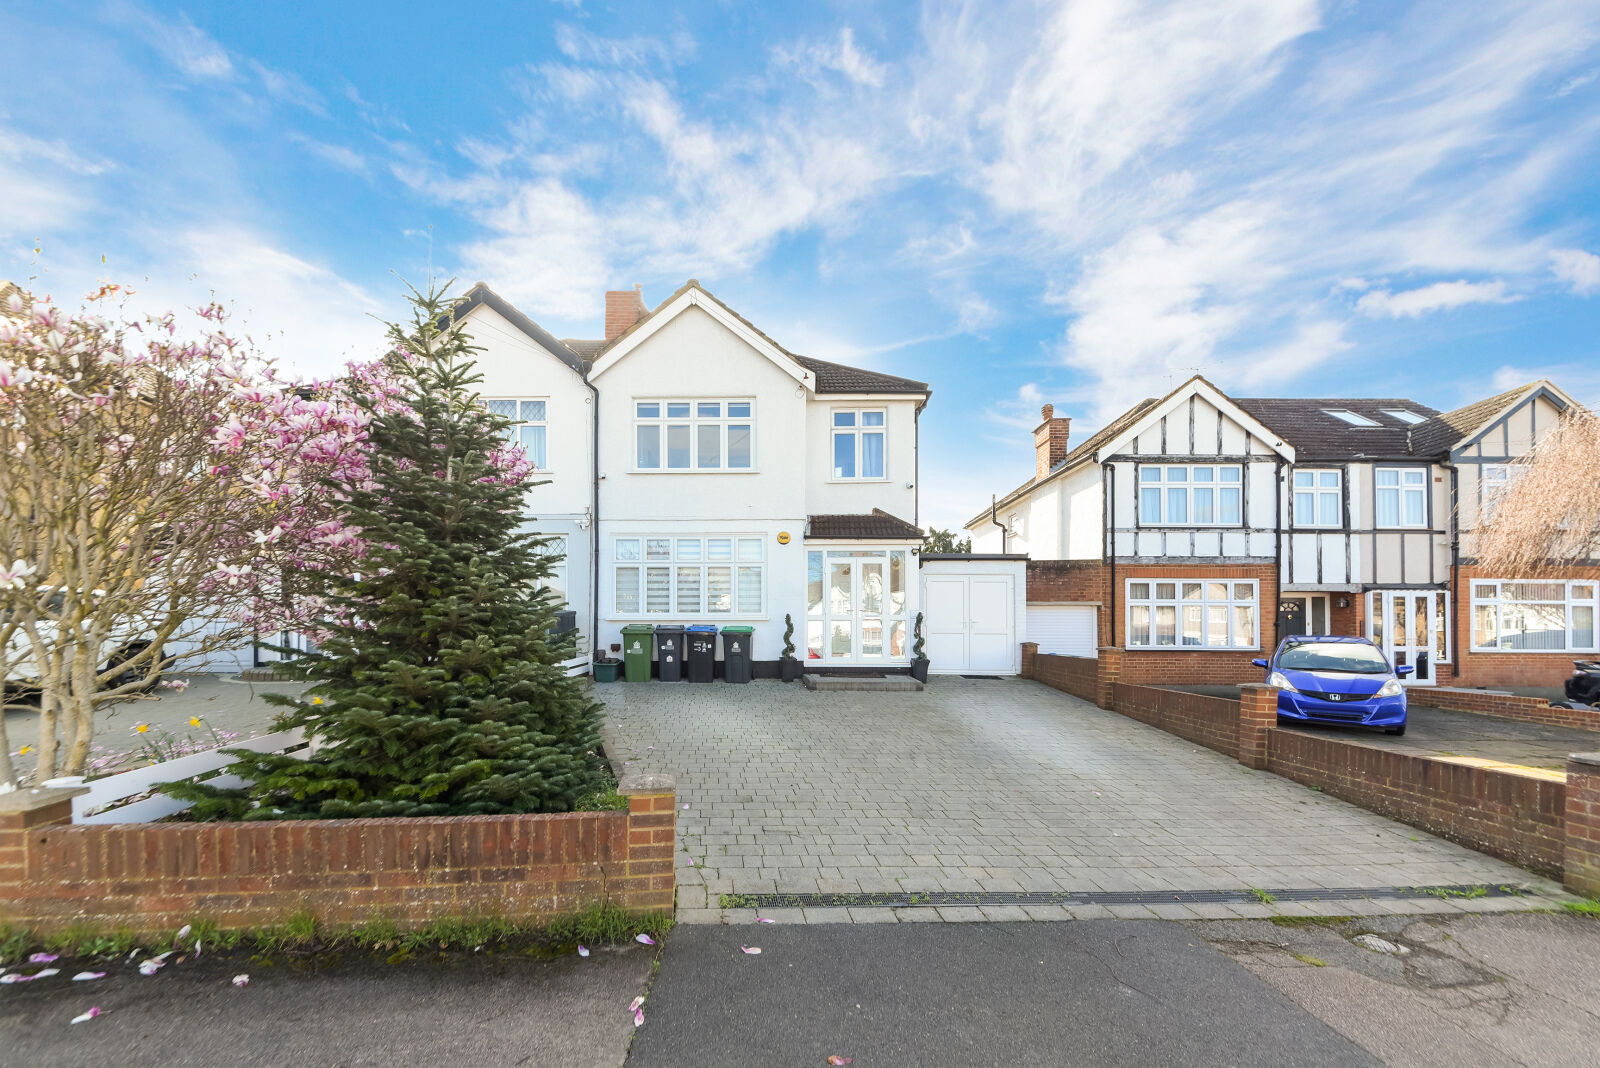 3 bedroom semi detached house to rent, Available now Beresford Avenue, Surbiton, KT5, main image